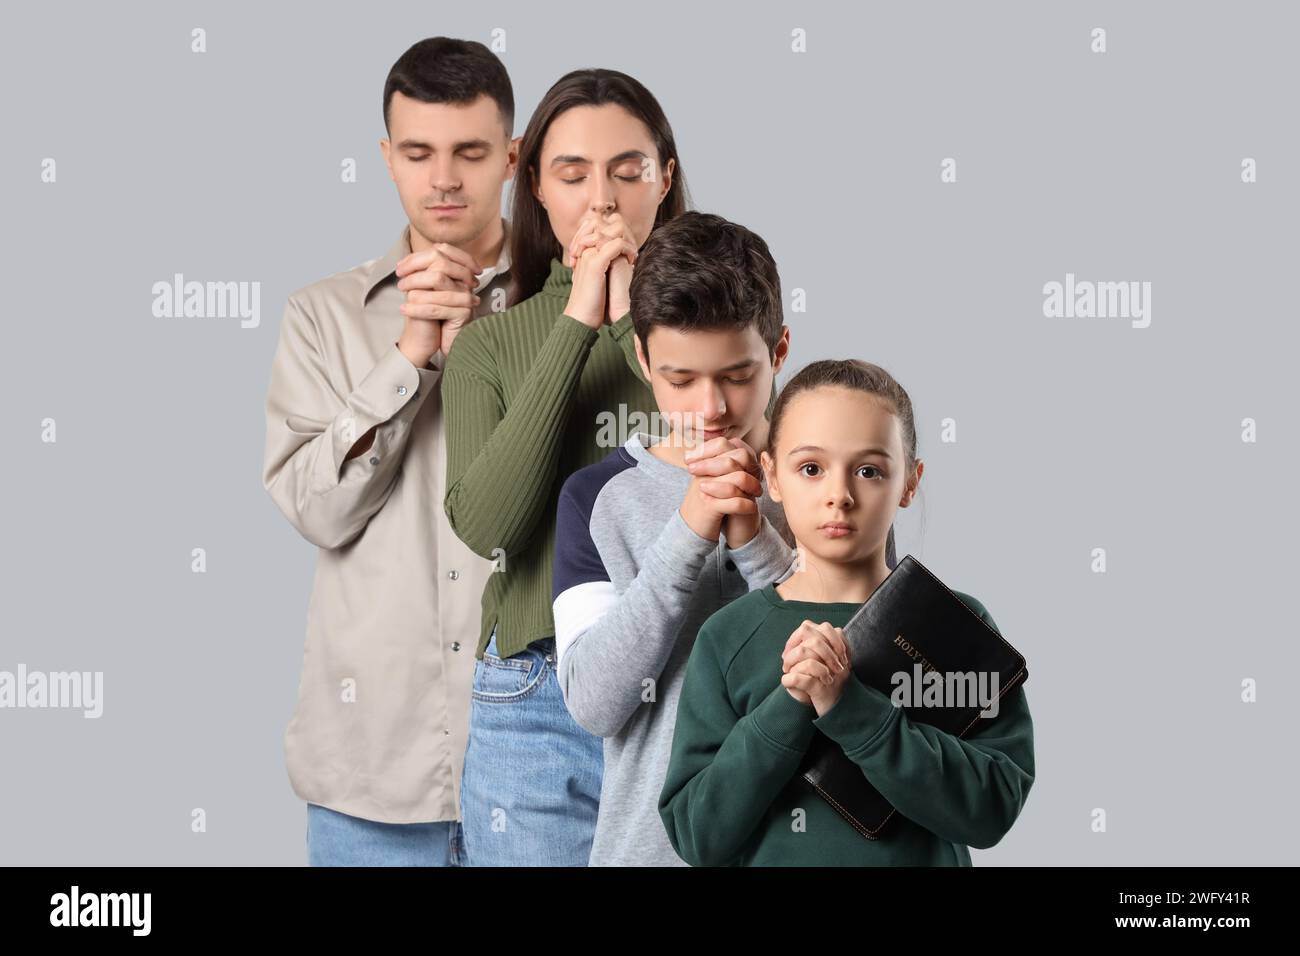 Family praying together on light background Stock Photo